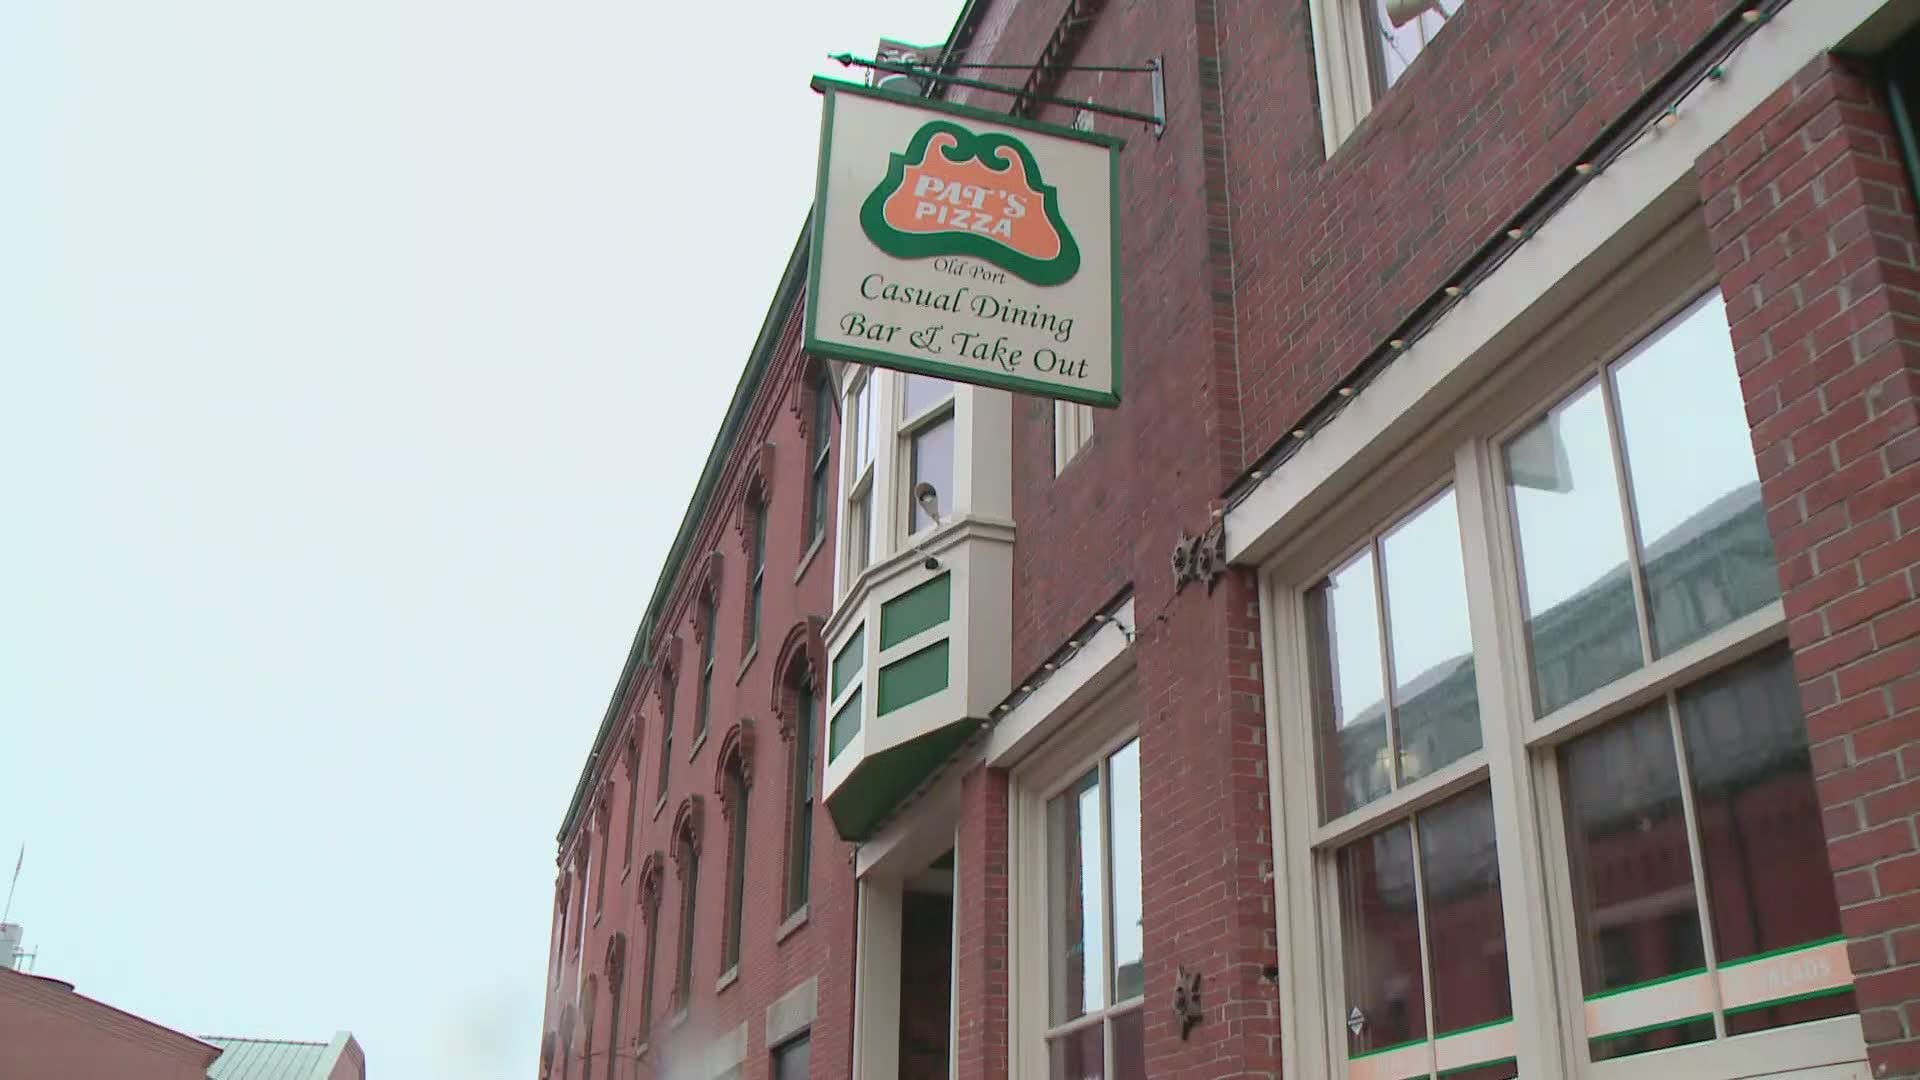 The Old Port restaurant said it would offer free food with a drink purchase on Friday, Saturday, and Sunday as it gets rid of inventory.